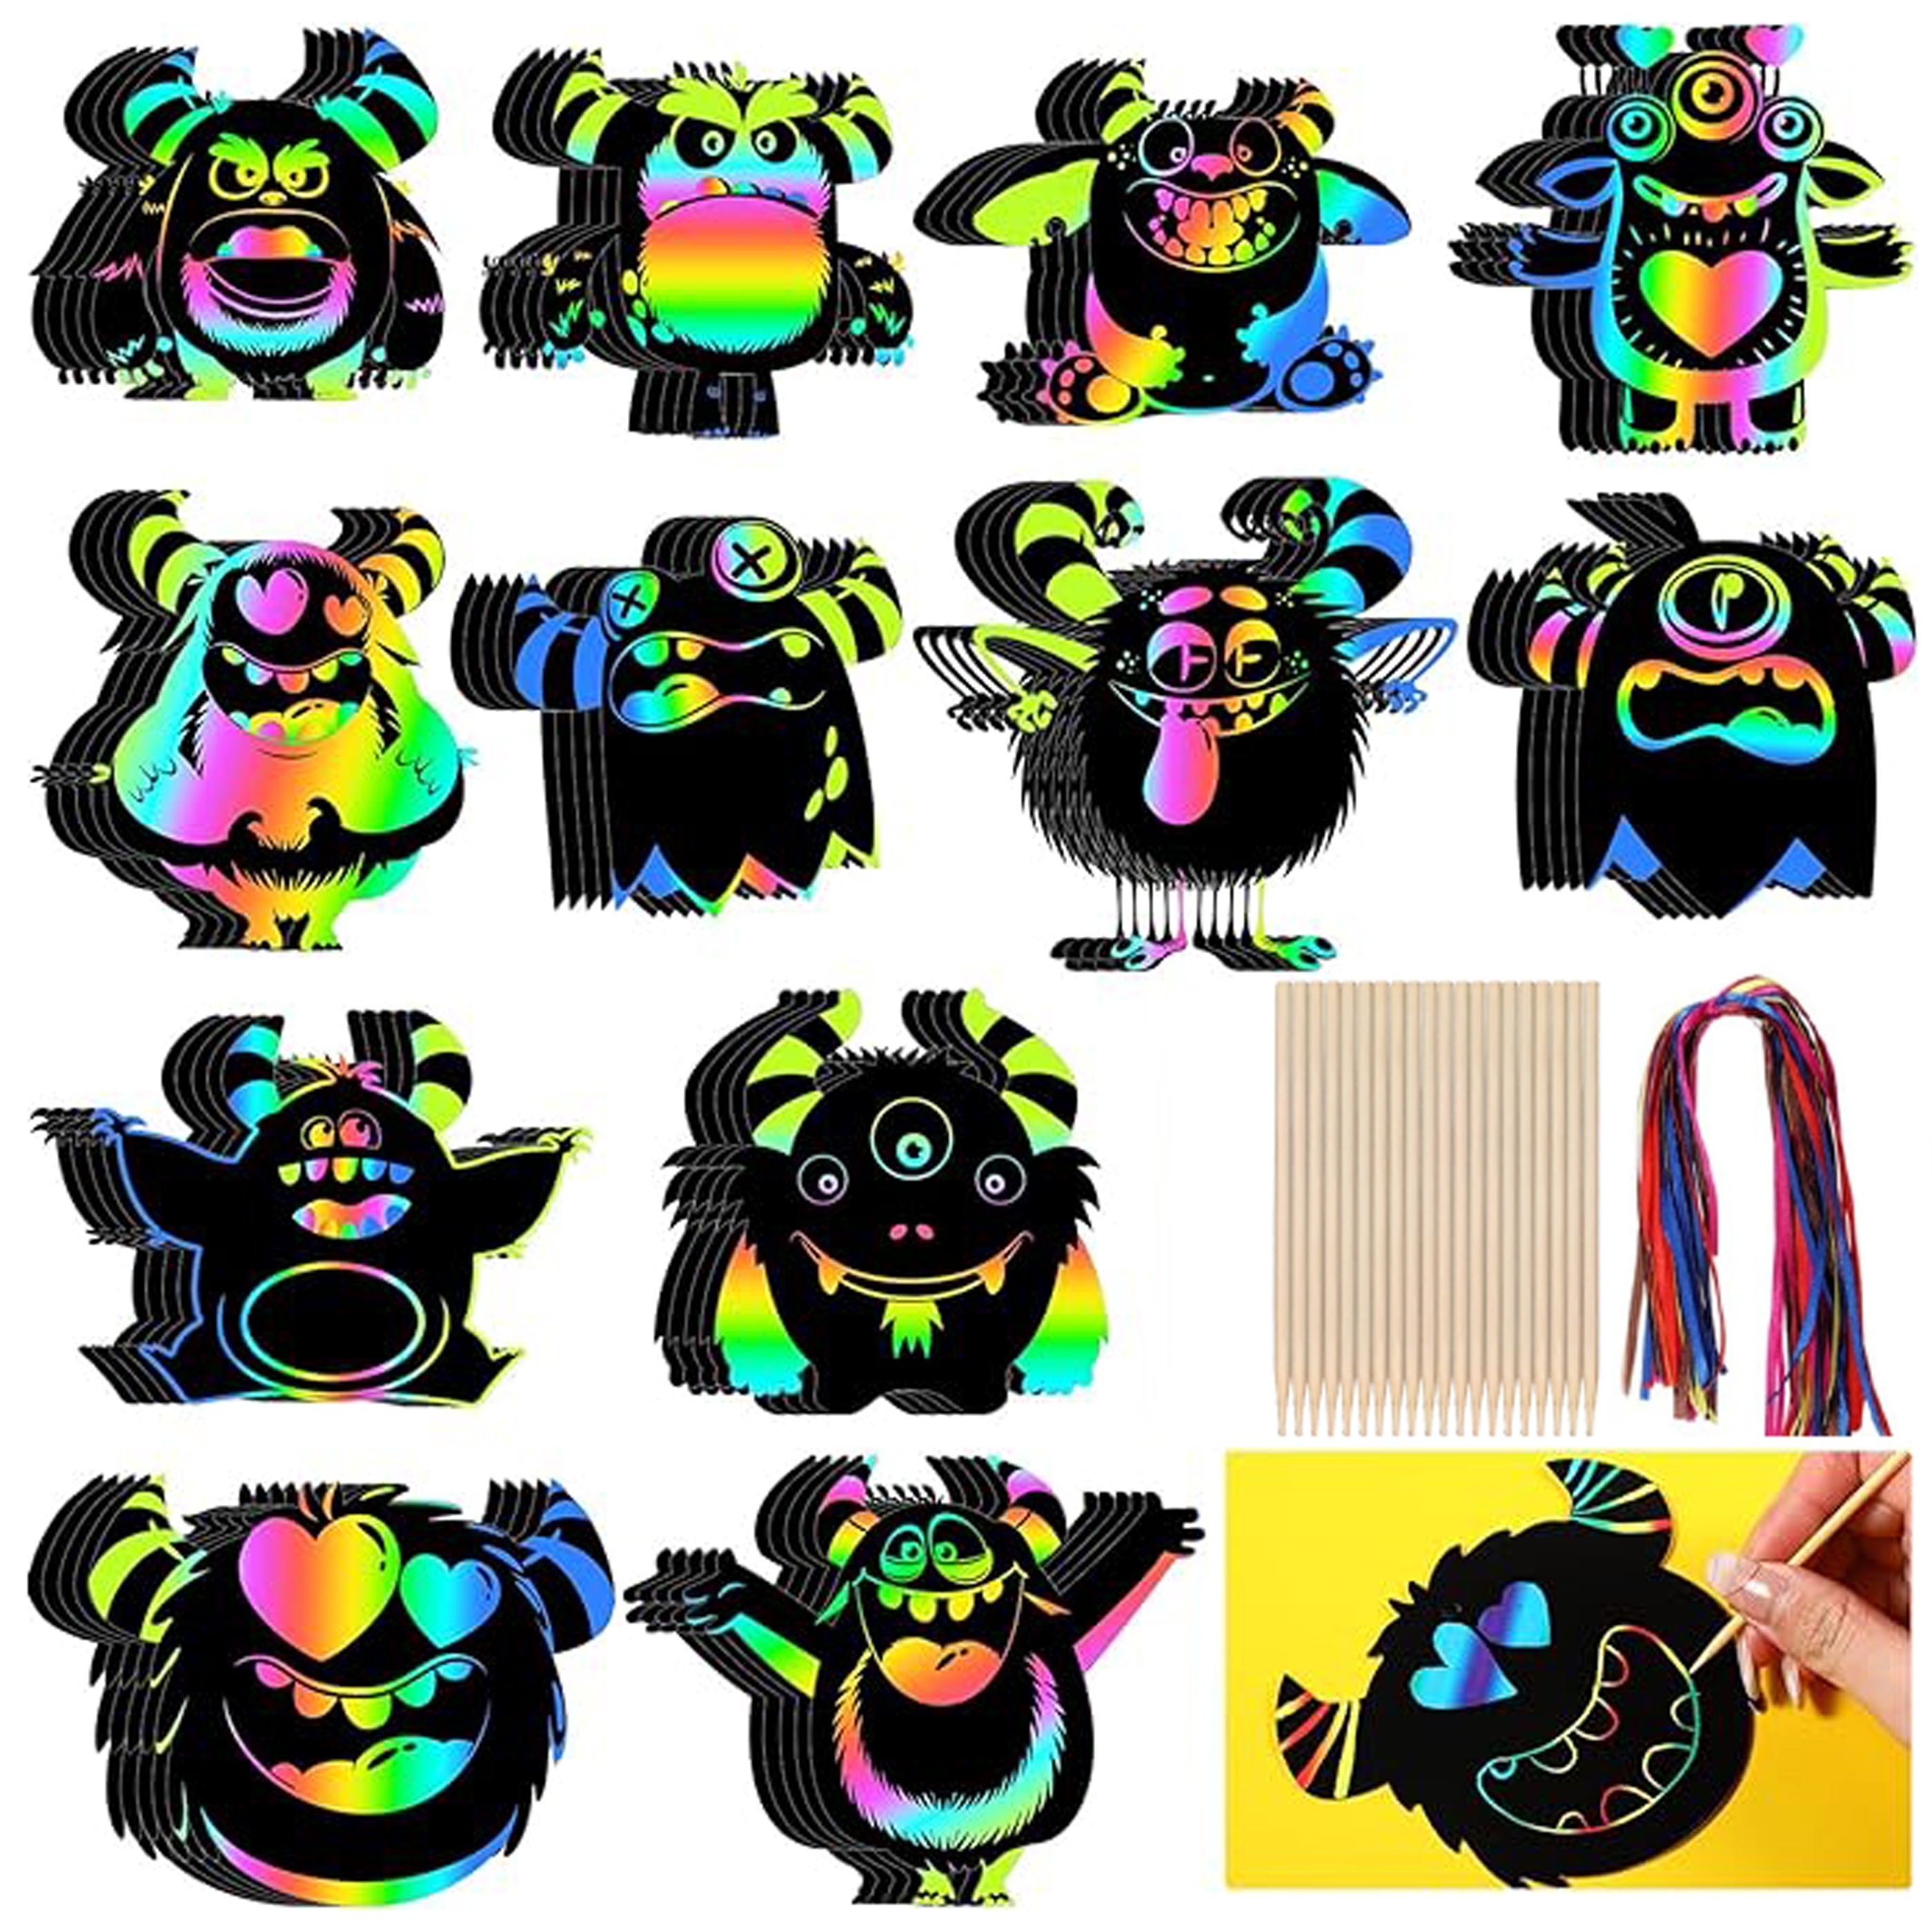 

48-piece Monster Scratch Art Set With Rainbow Paper, Ribbons & Styluses - Perfect For Graduation, Birthday Parties & Home Decor, 12 Unique Designs